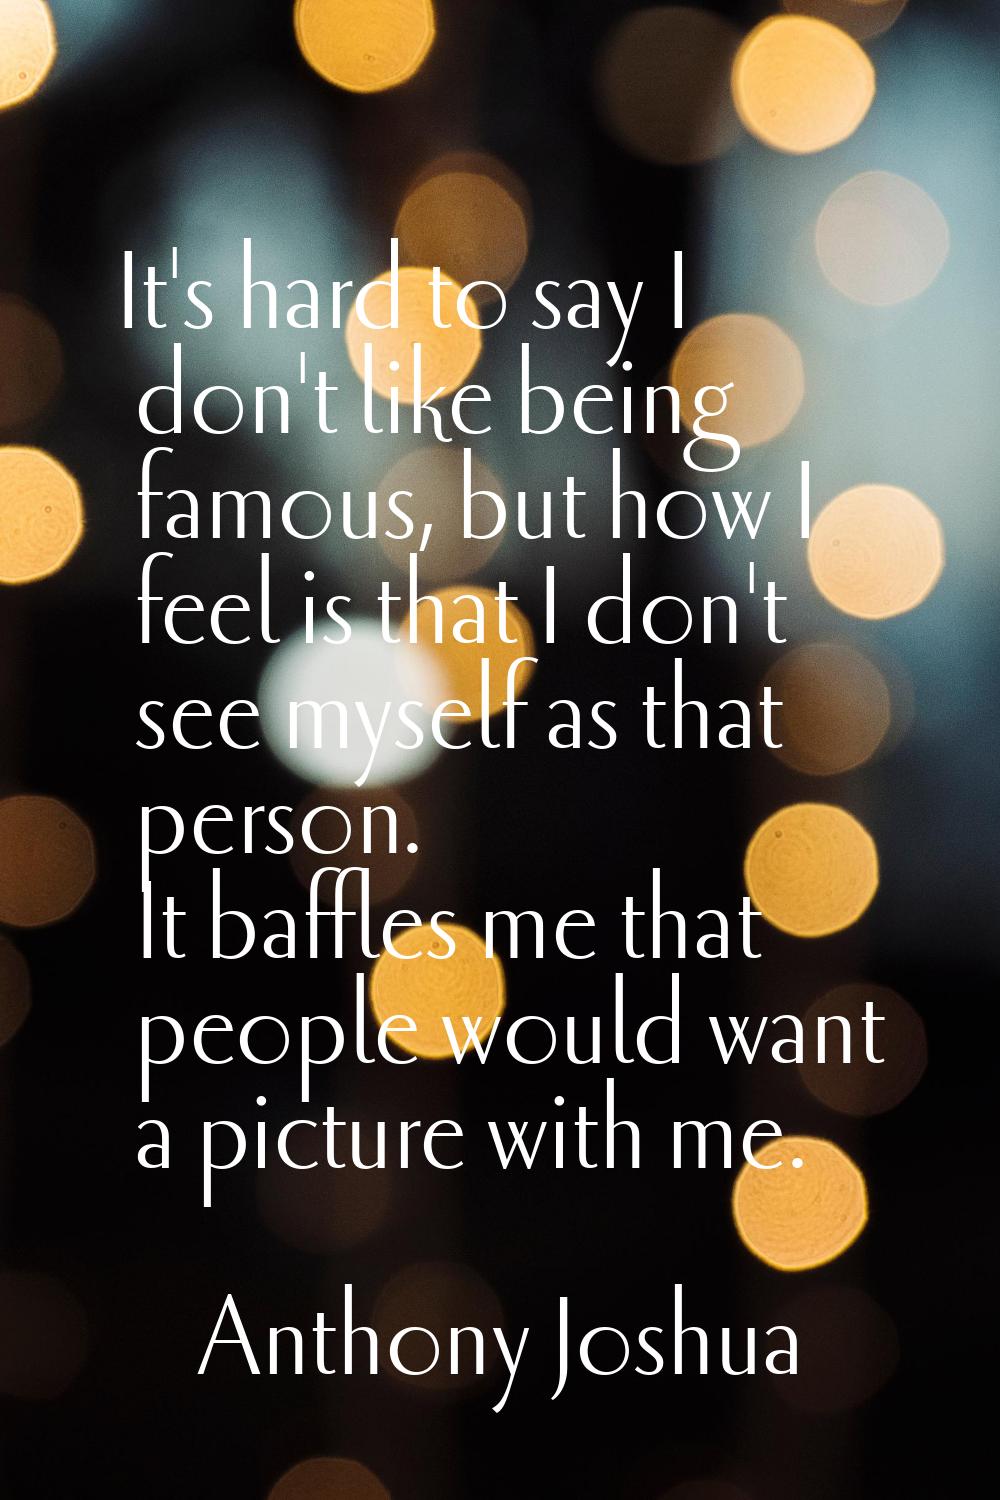 It's hard to say I don't like being famous, but how I feel is that I don't see myself as that perso